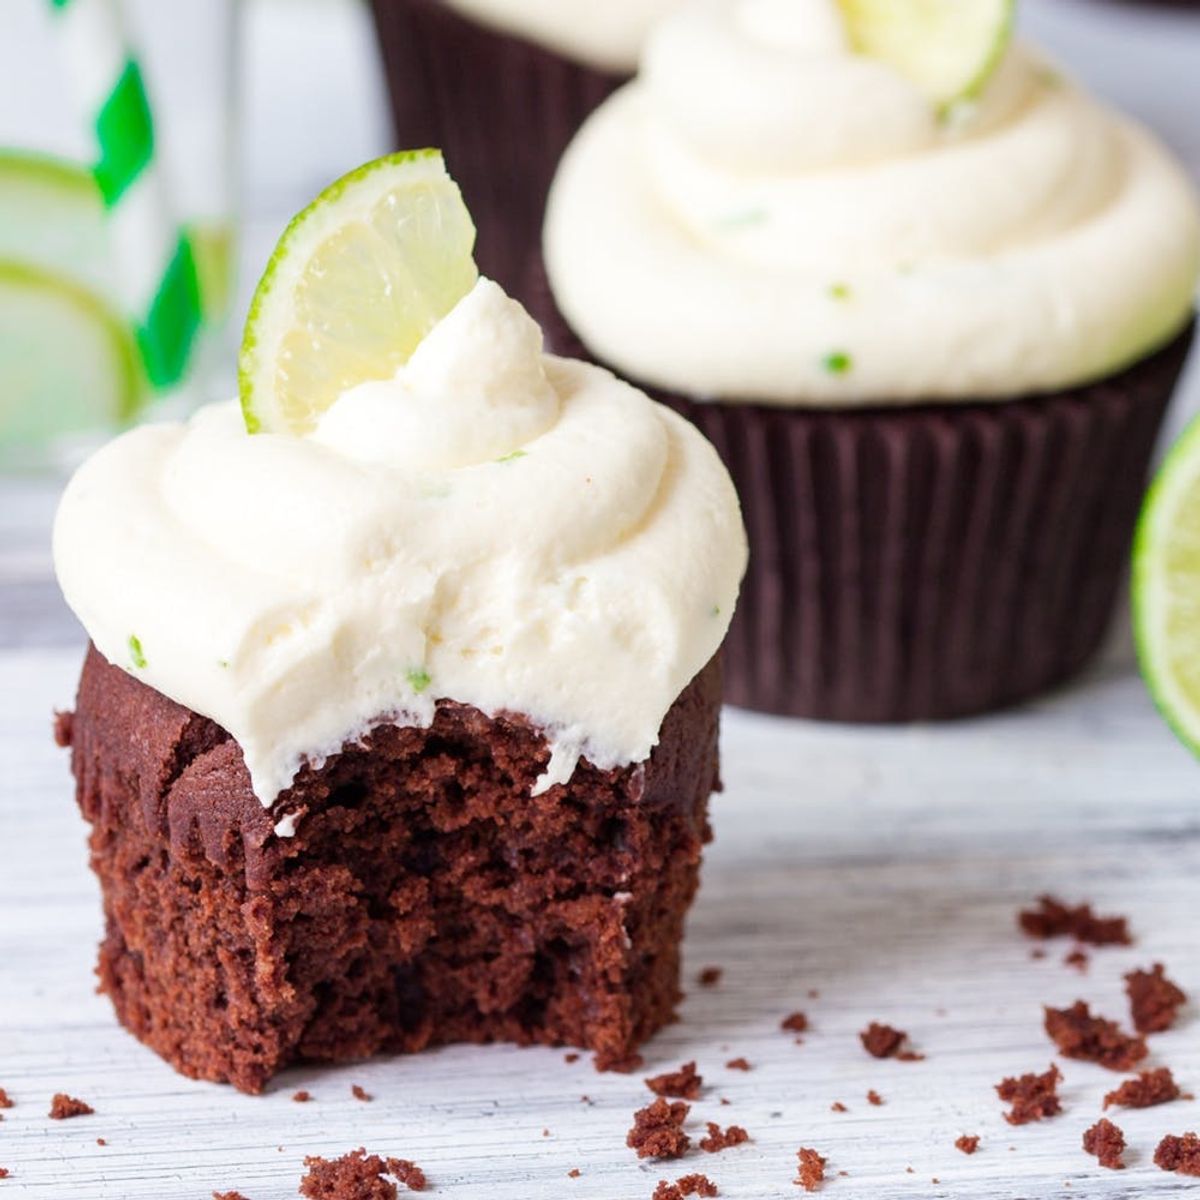 How to Combine Your 2 Favorite Desserts into 1 Amazing Cupcake